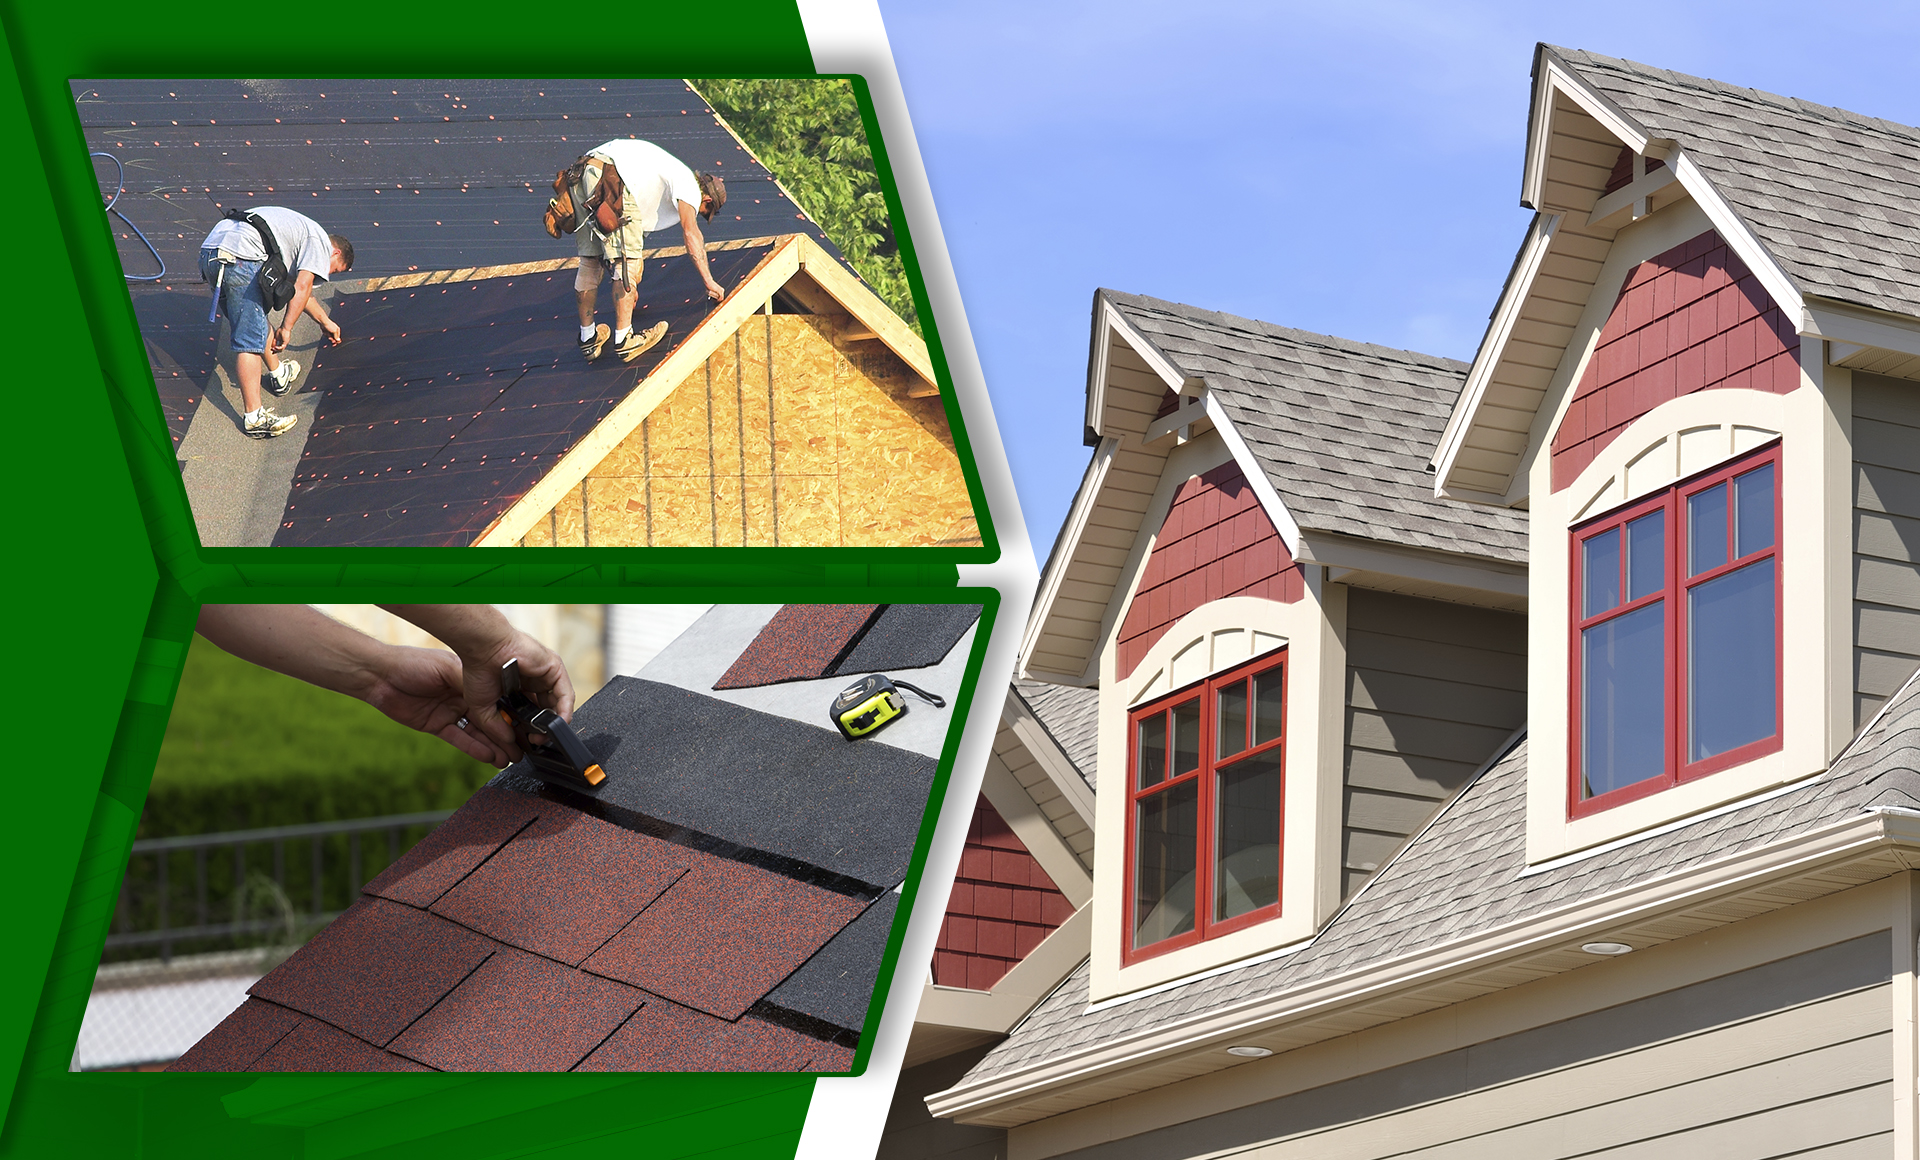 30 YEARS OF SUPERIOR ROOFING SOLUTIONS - Slider